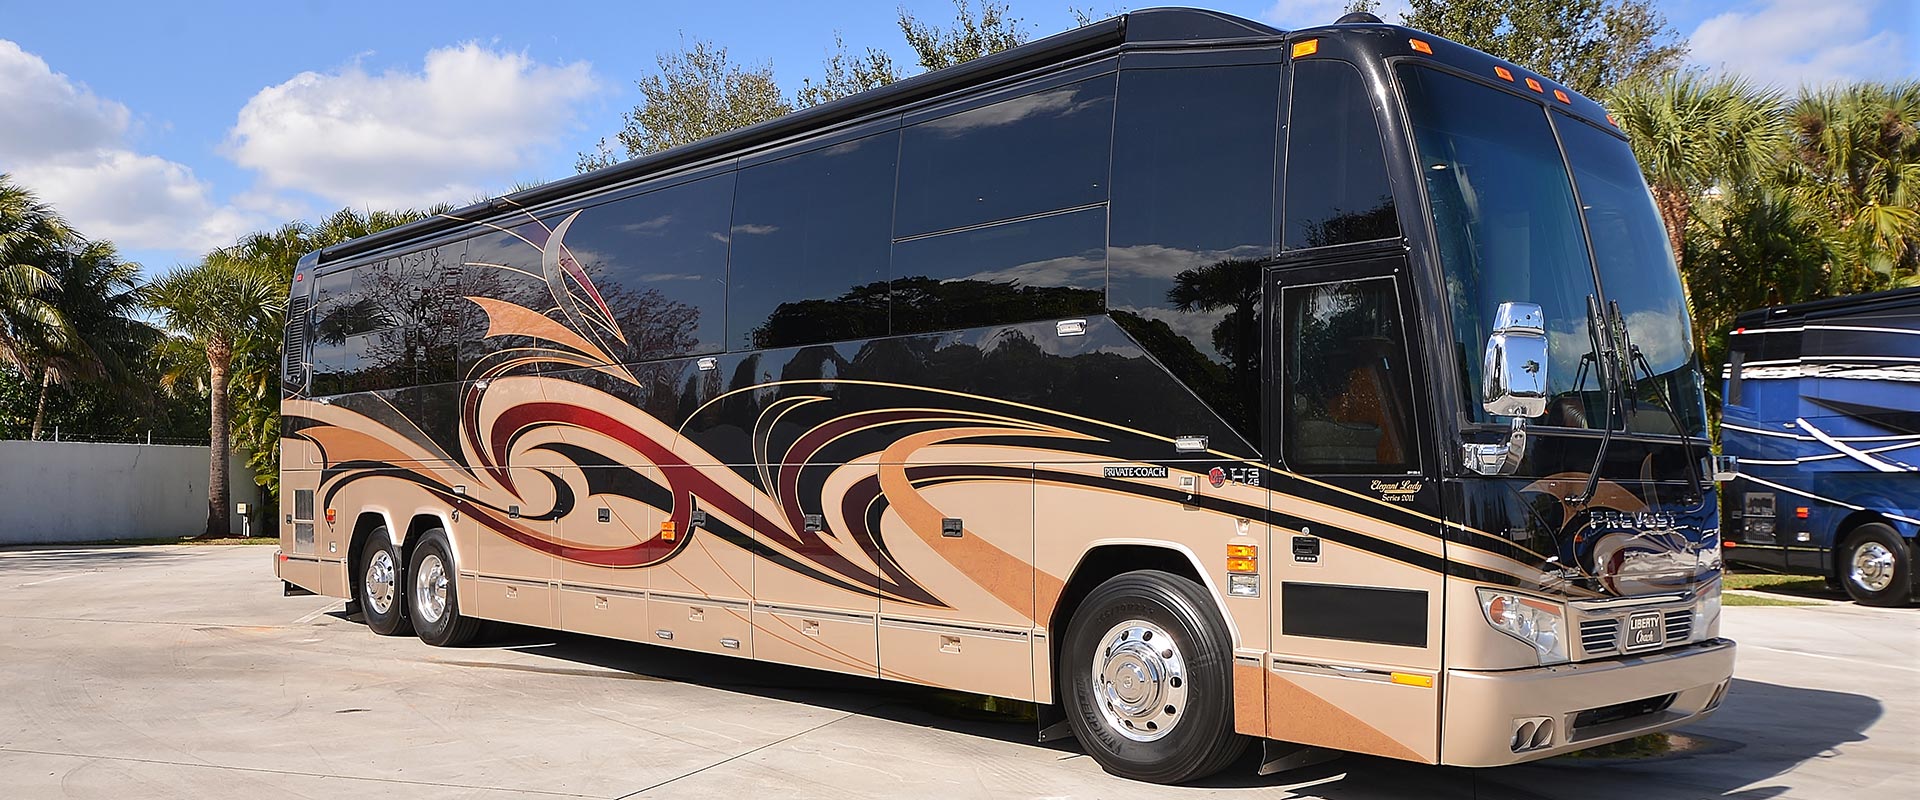 2011 Liberty Coach #836-B exterior entry side front view of motorcoach on the lot